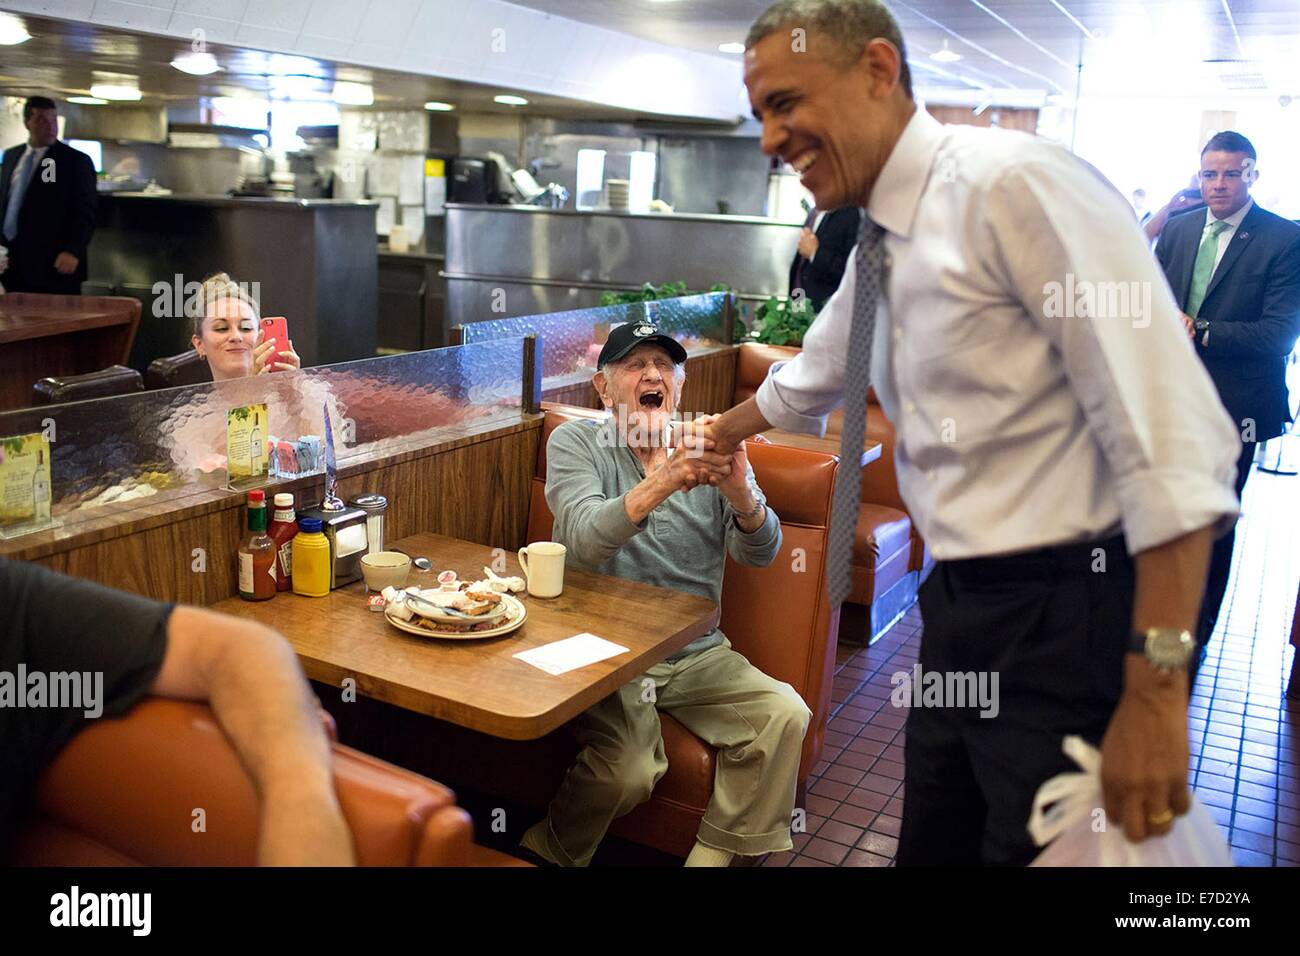 US President Barack Obama greets patrons at Canter's Delicatessen July 24, 2014 in Los Angeles, California. Stock Photo